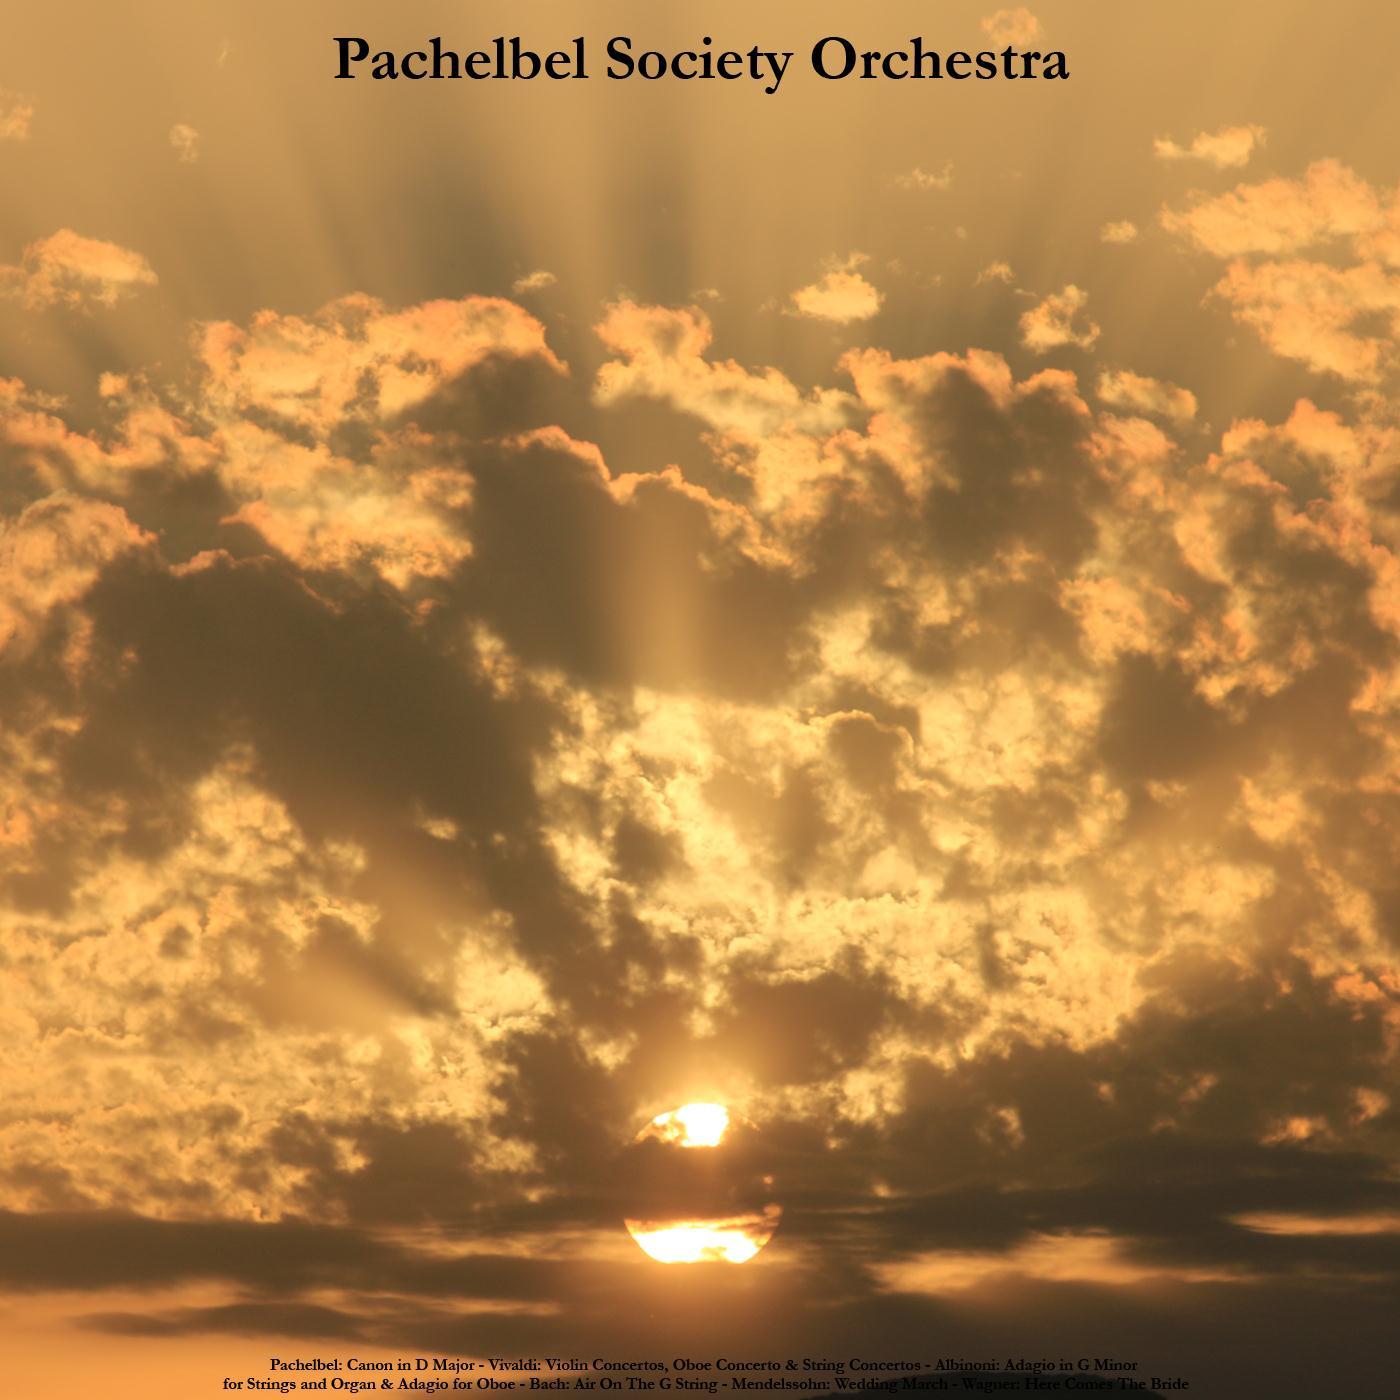 Pachelbel Society Orchestra - Concerto for Violin and Strings in A Minor, Op. 3, No. 6, Rv 356 